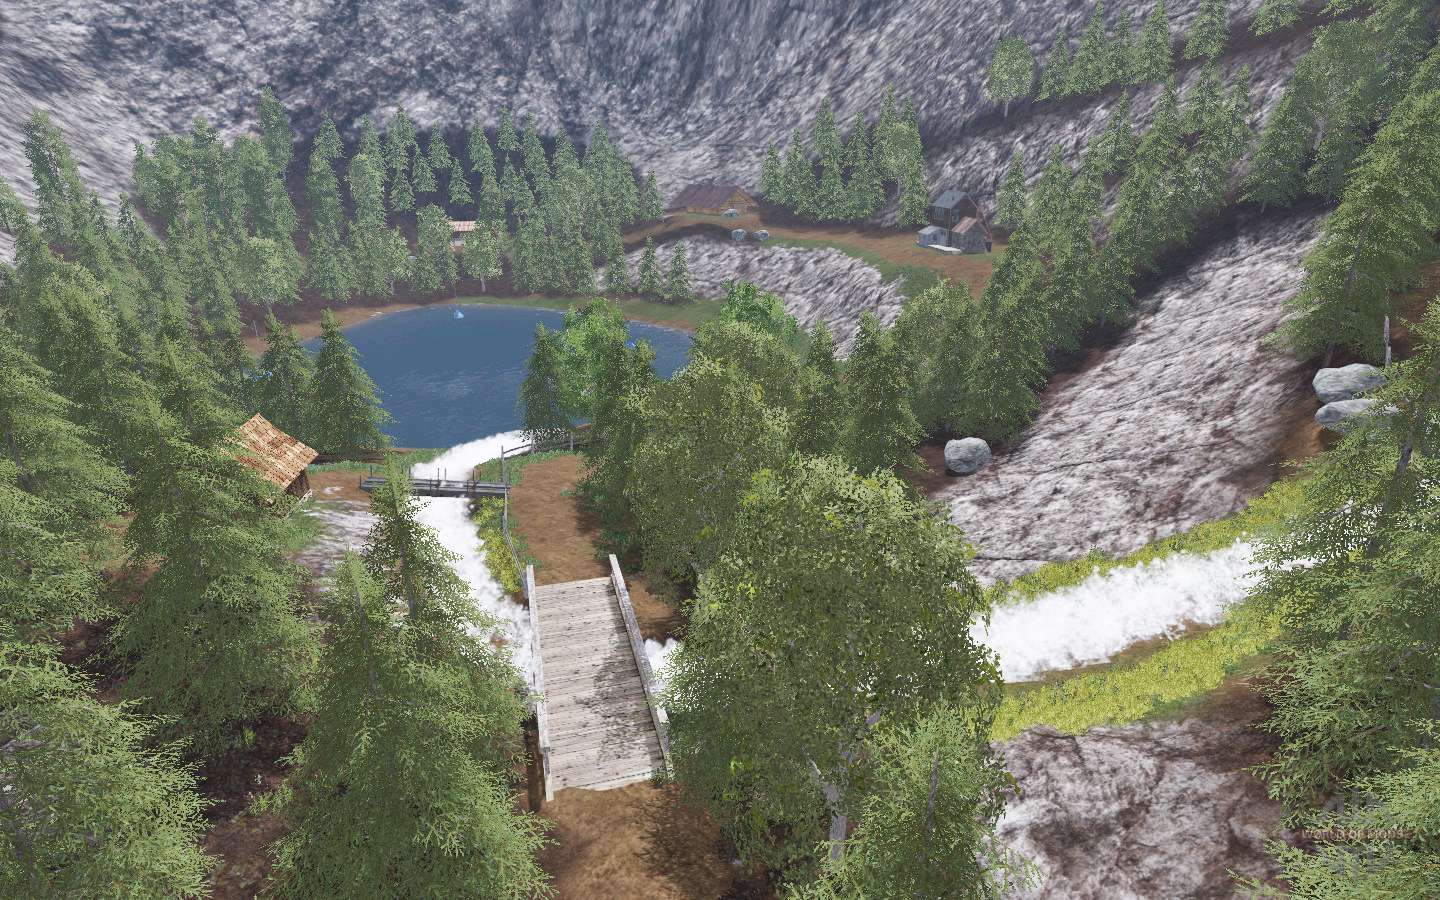 legion of the forest fs17 mod download